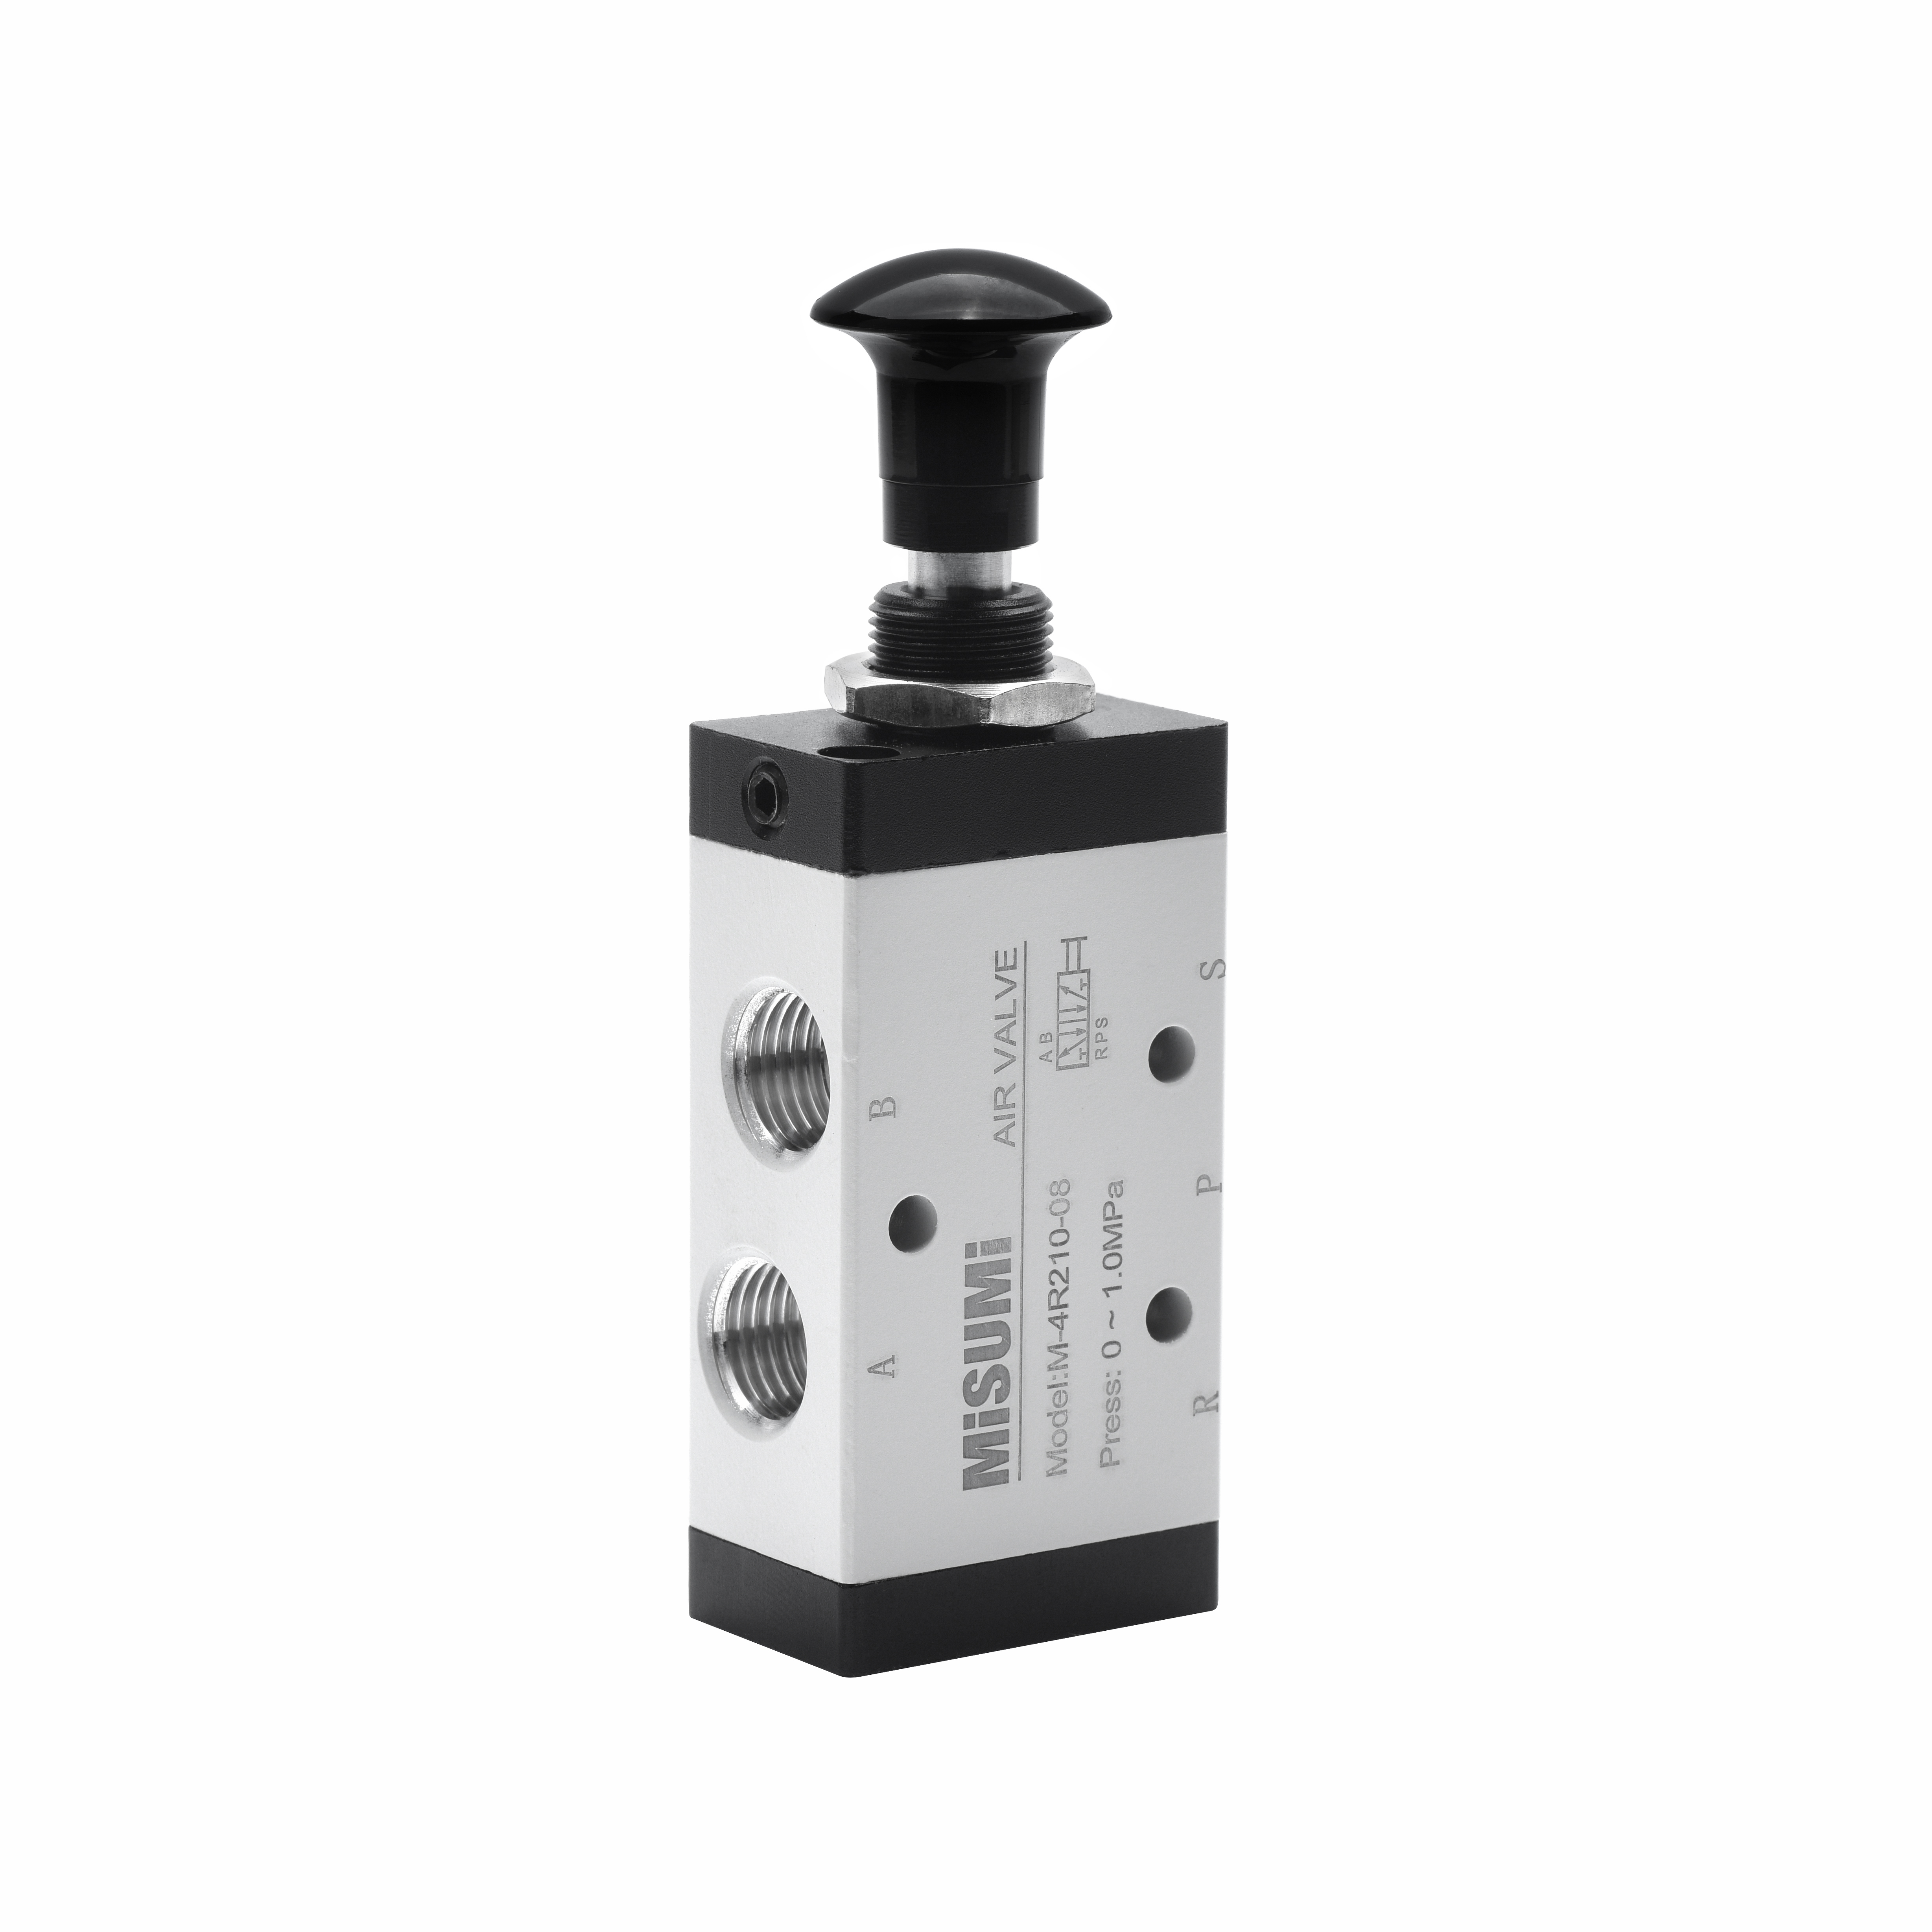 Hand Switching Valves With Pull Knob (E-MVP310-03-S)